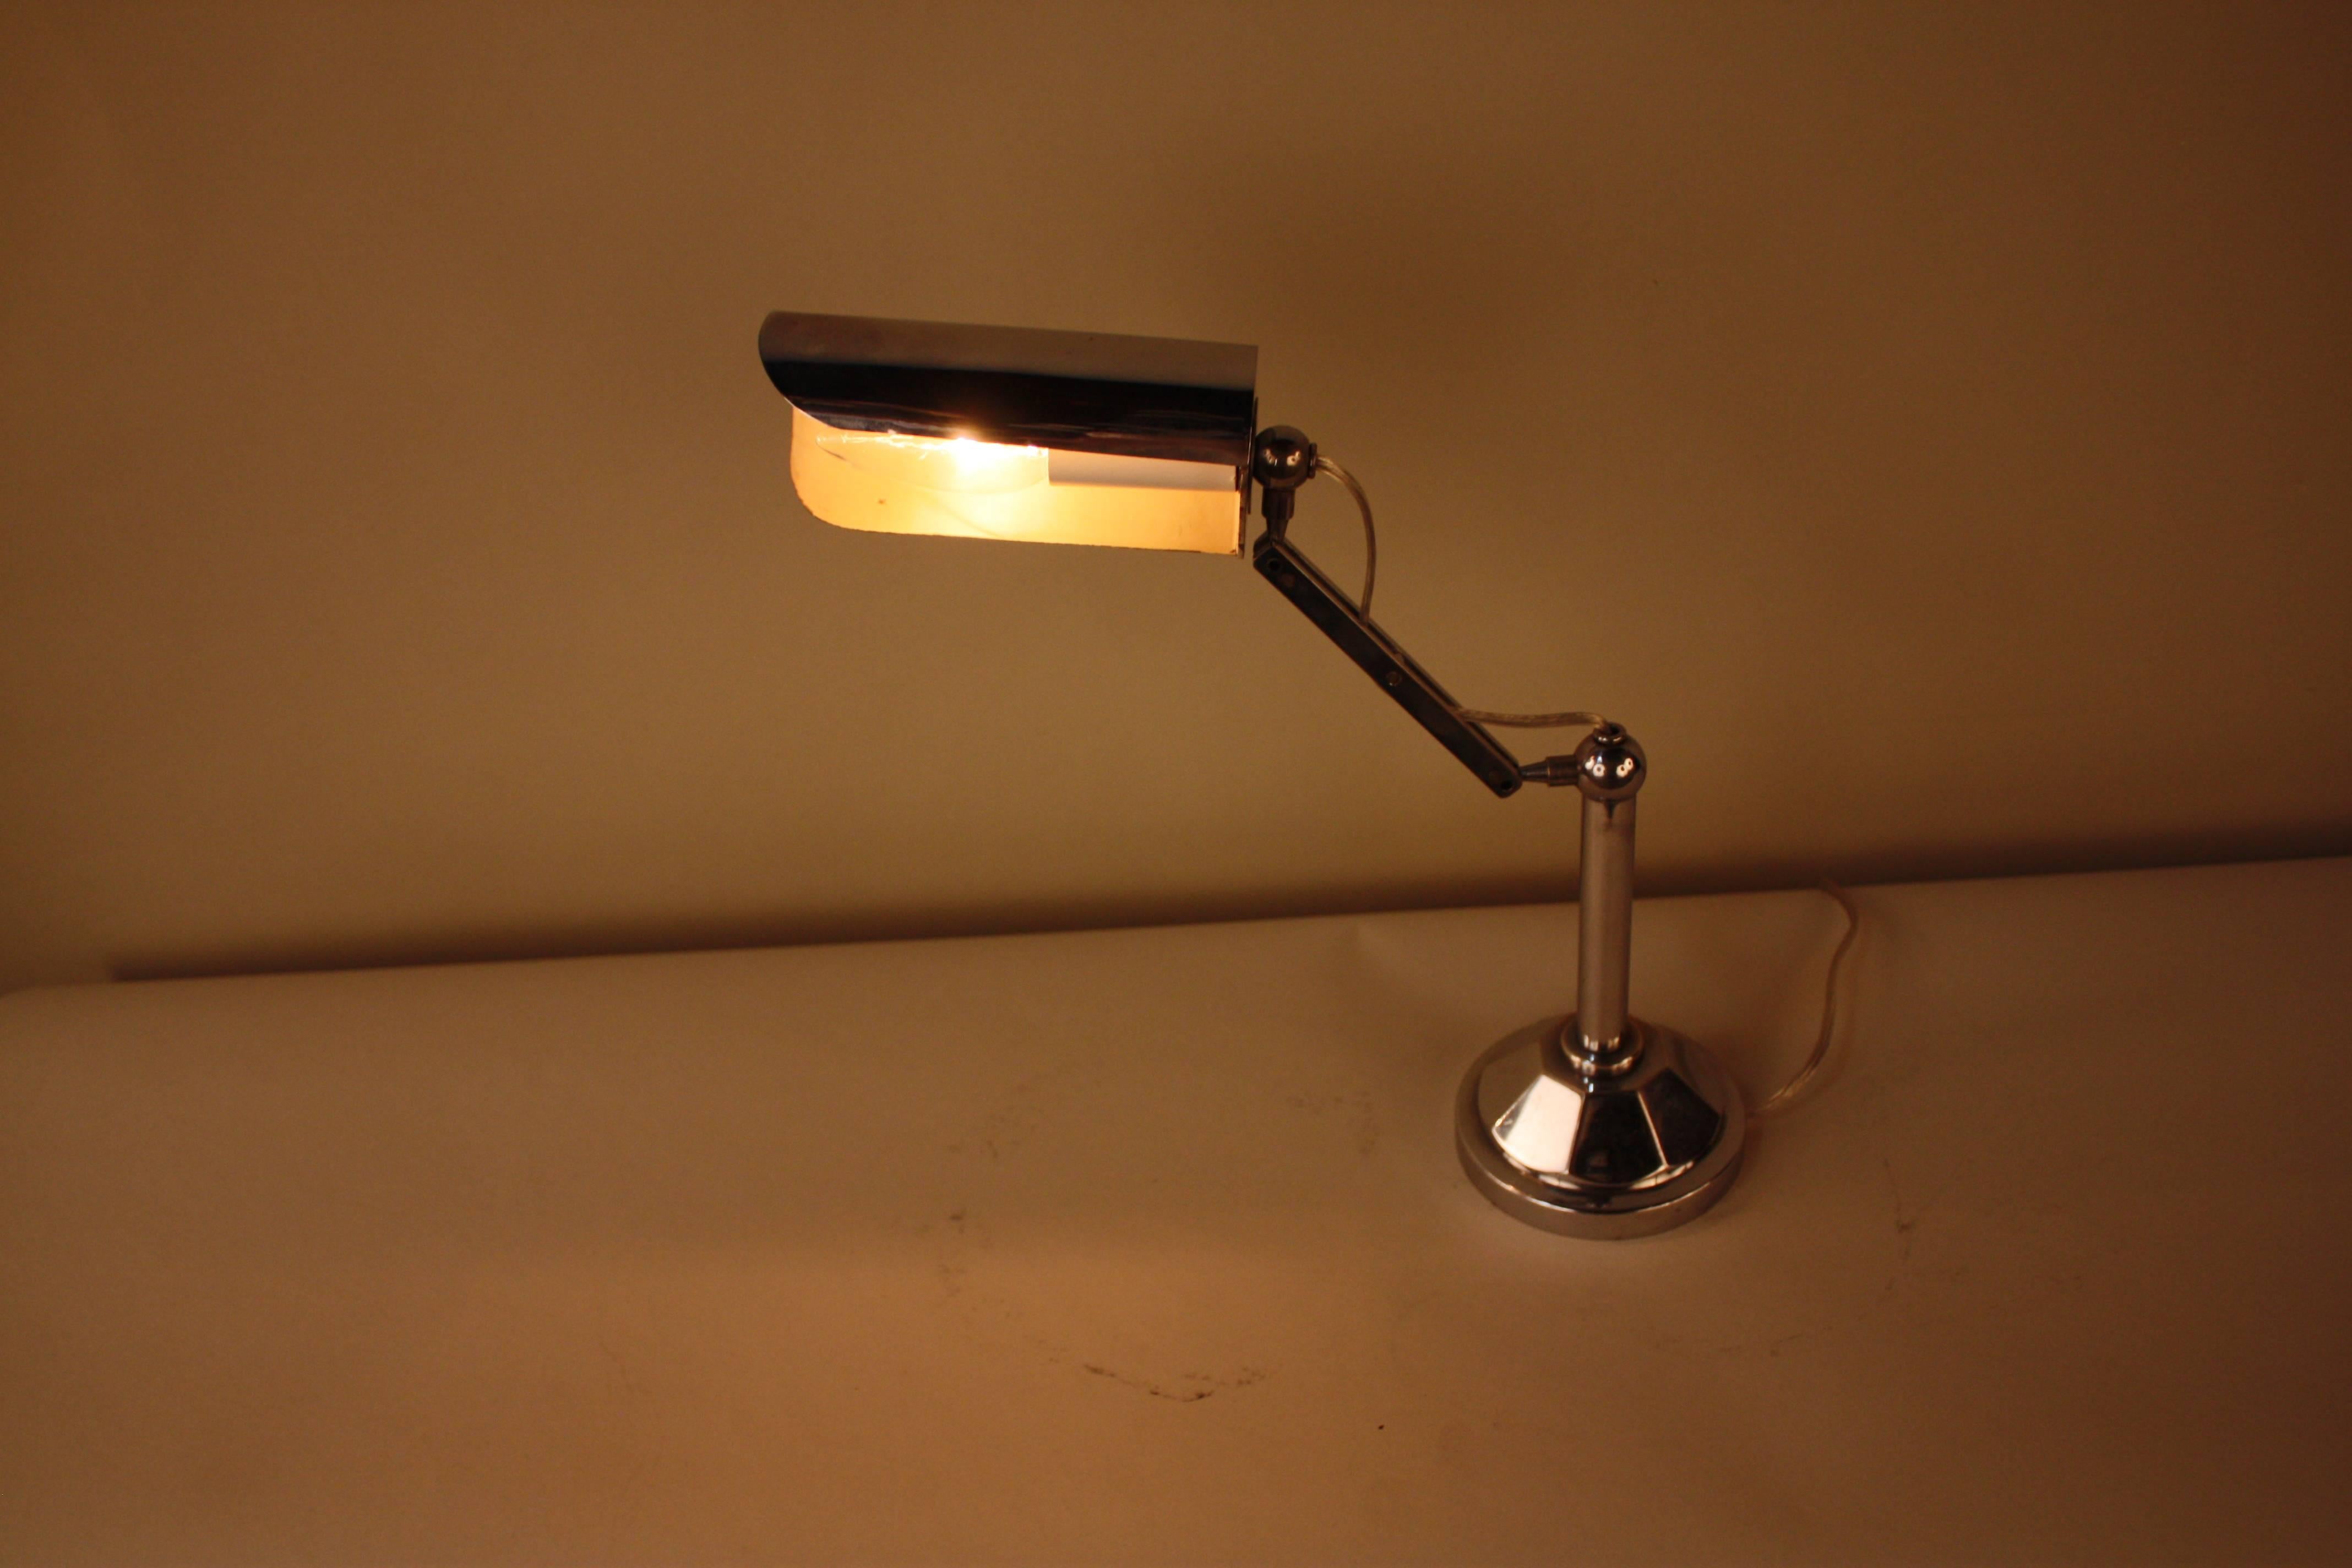 Simple but very functional Adjustable chrome desk lamp.